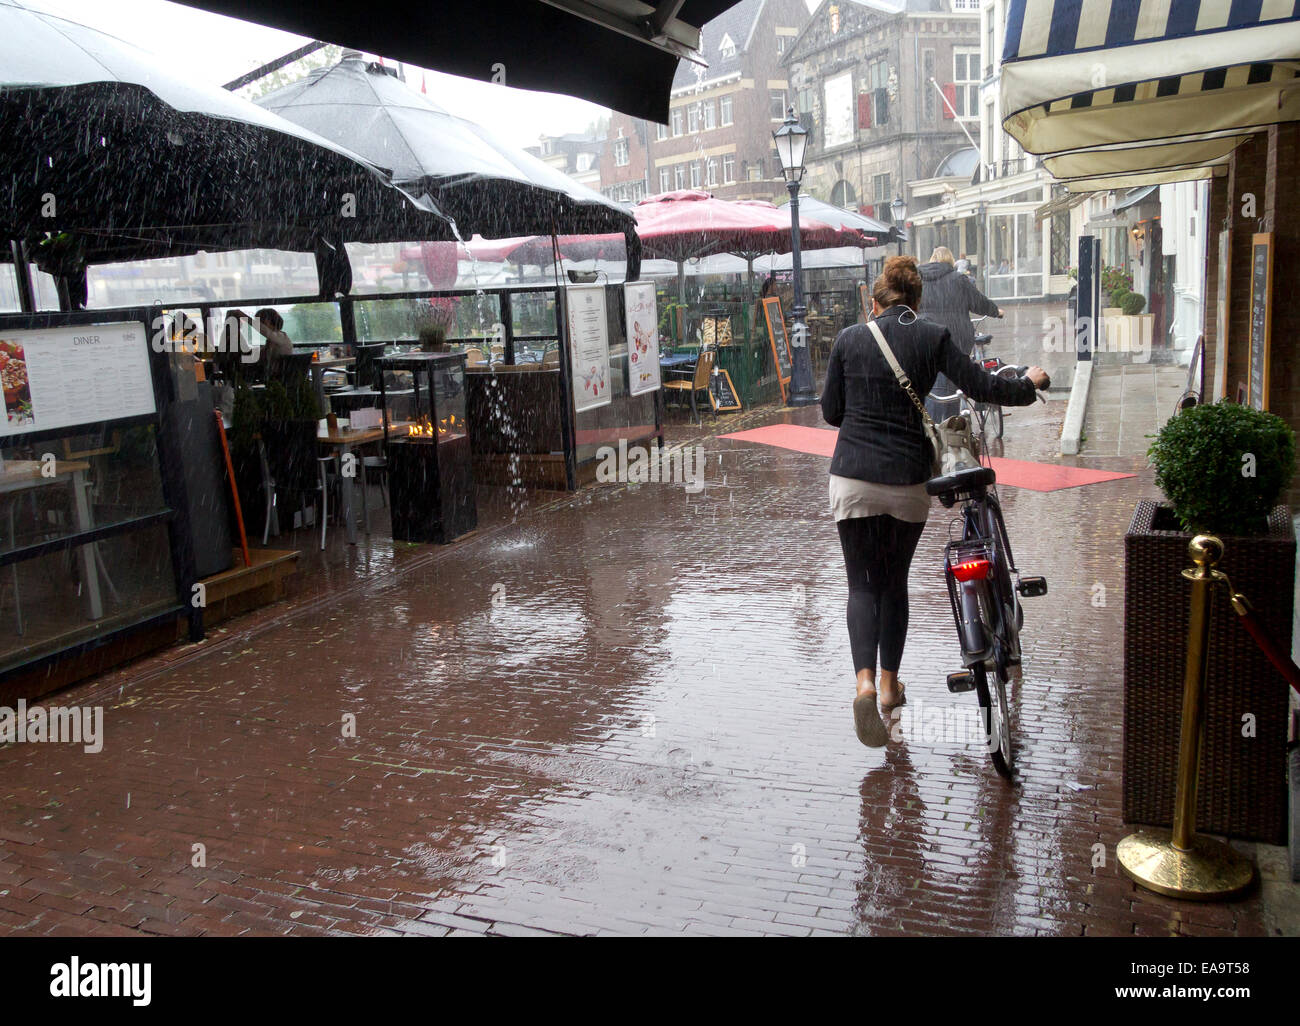 Cafes in the Markt (market place) Gouda, South Holland, The Netherlands during a torrential downpour of rain. Stock Photo